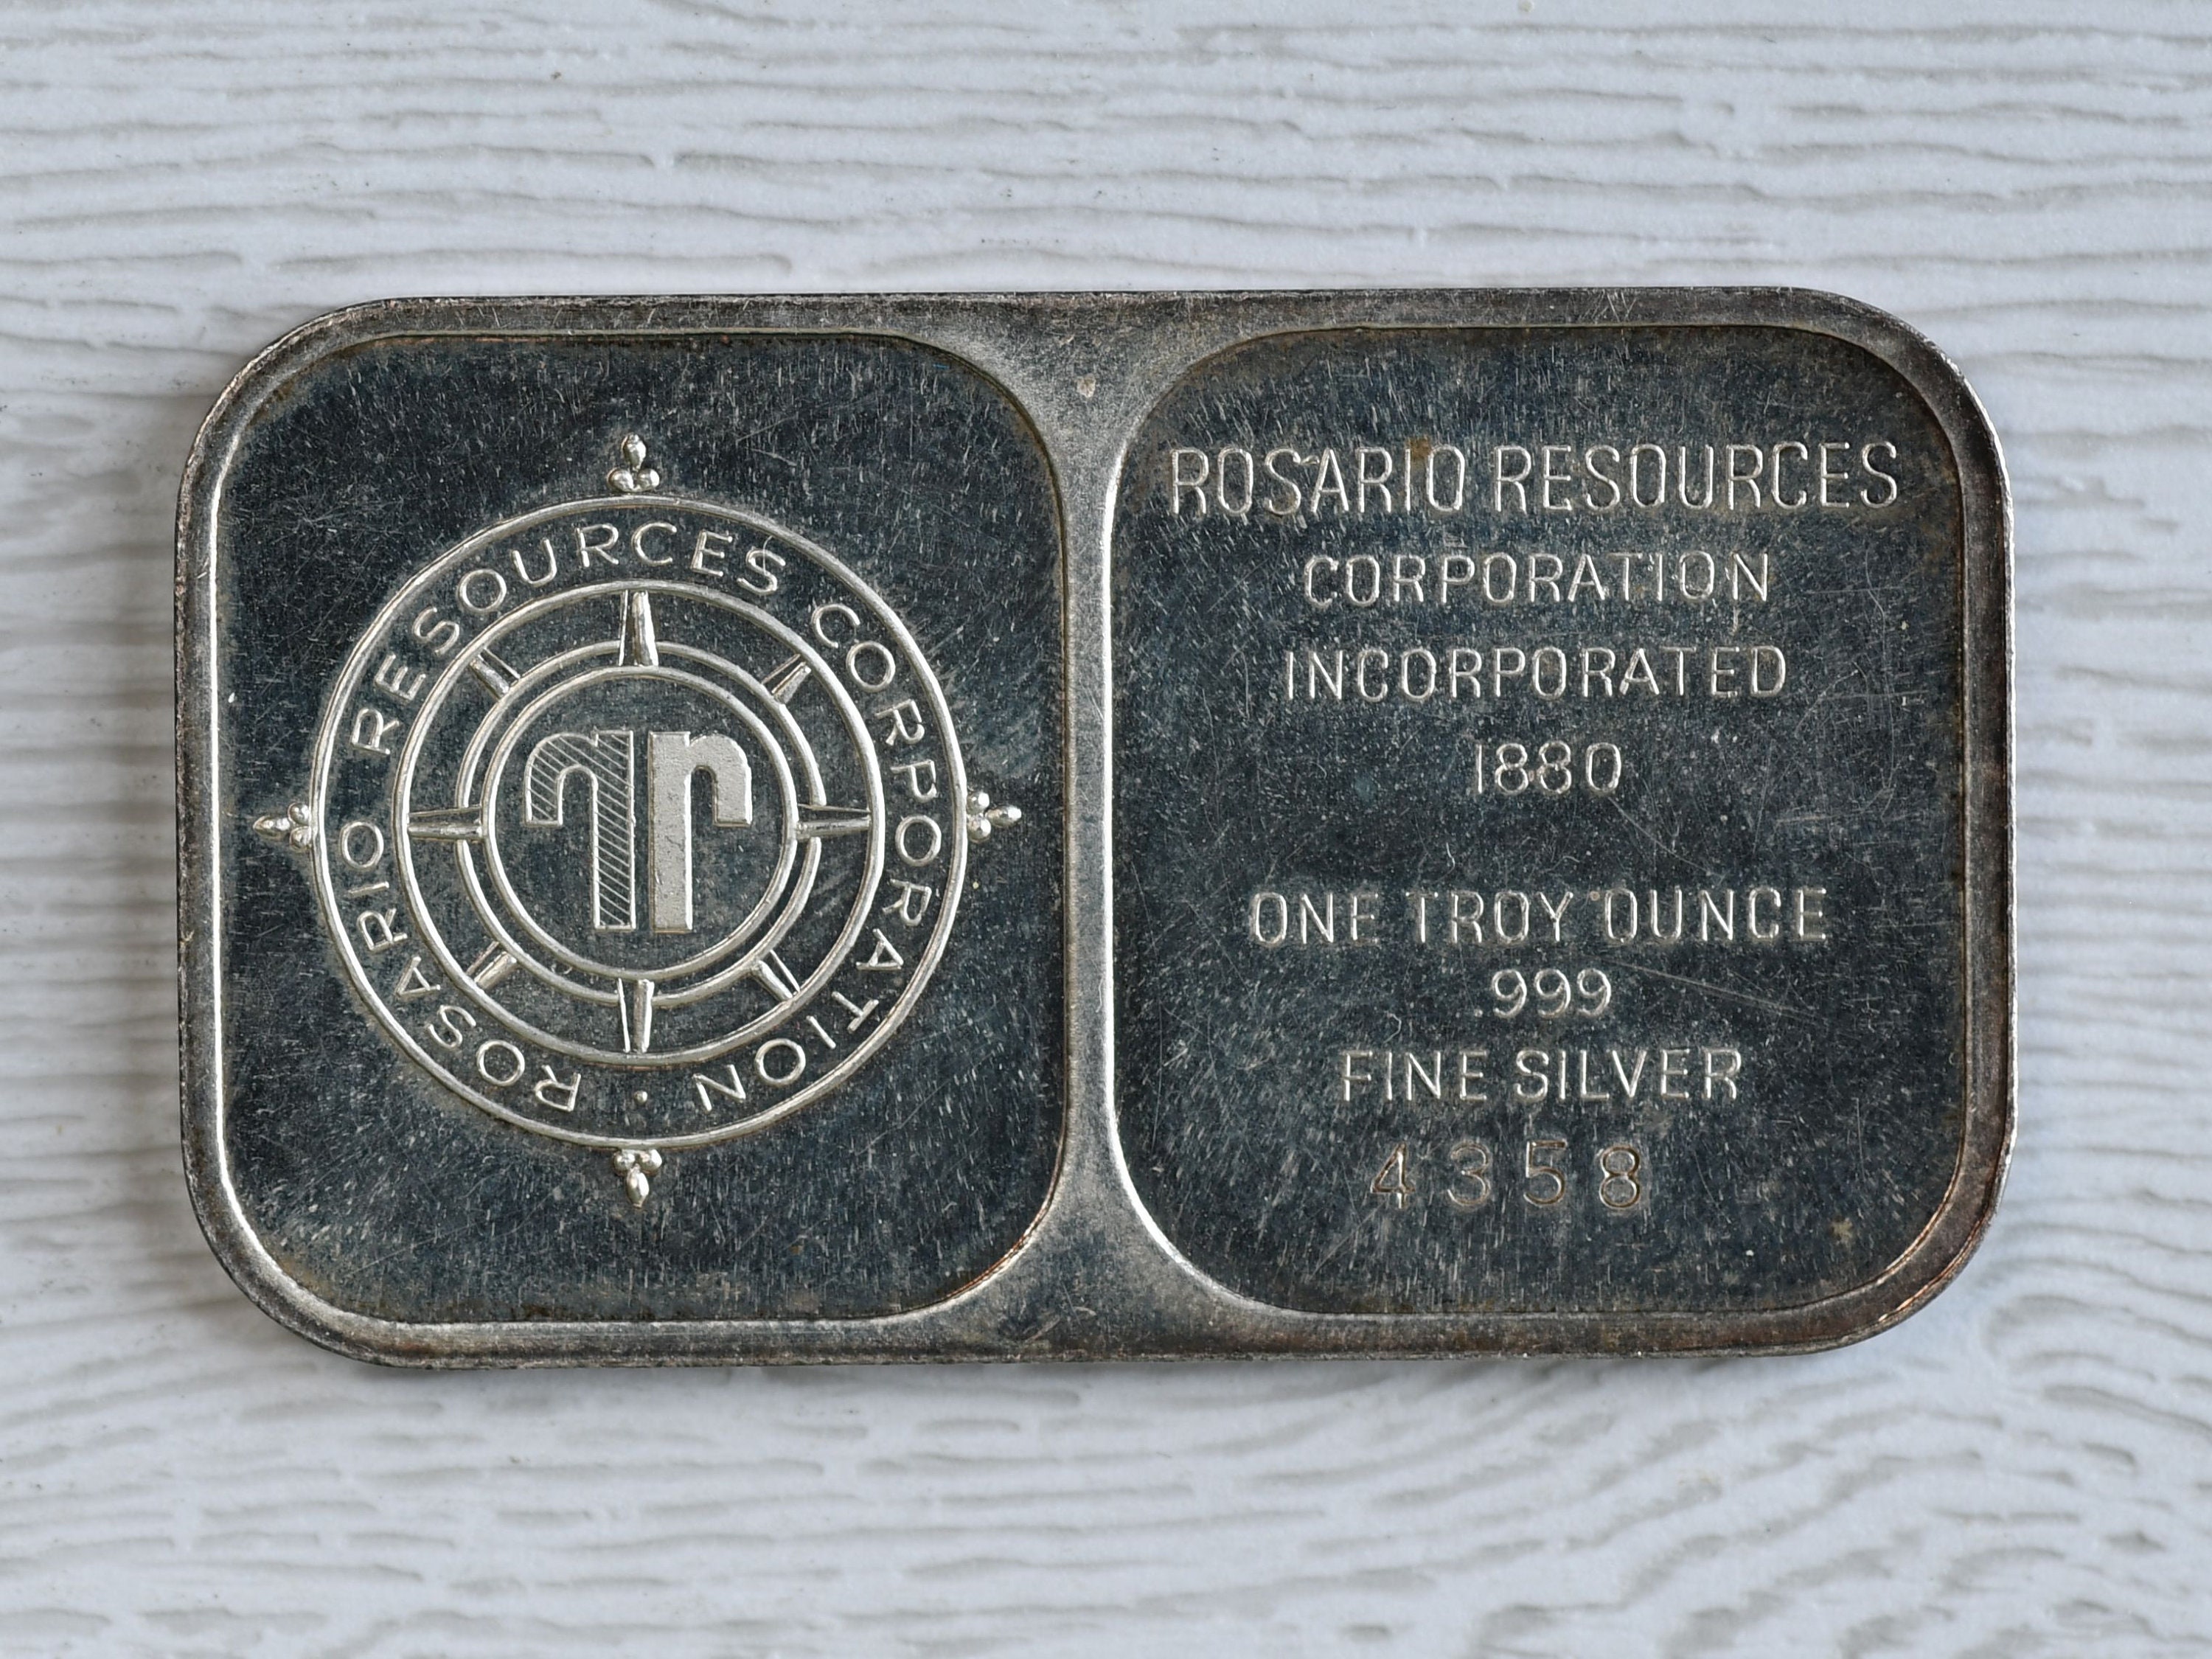 1975 Rosario Resources Corporation 1 Troy Ounce .999 Fine Silver Art Bar  Tomb of Columbus, Dominican Republic